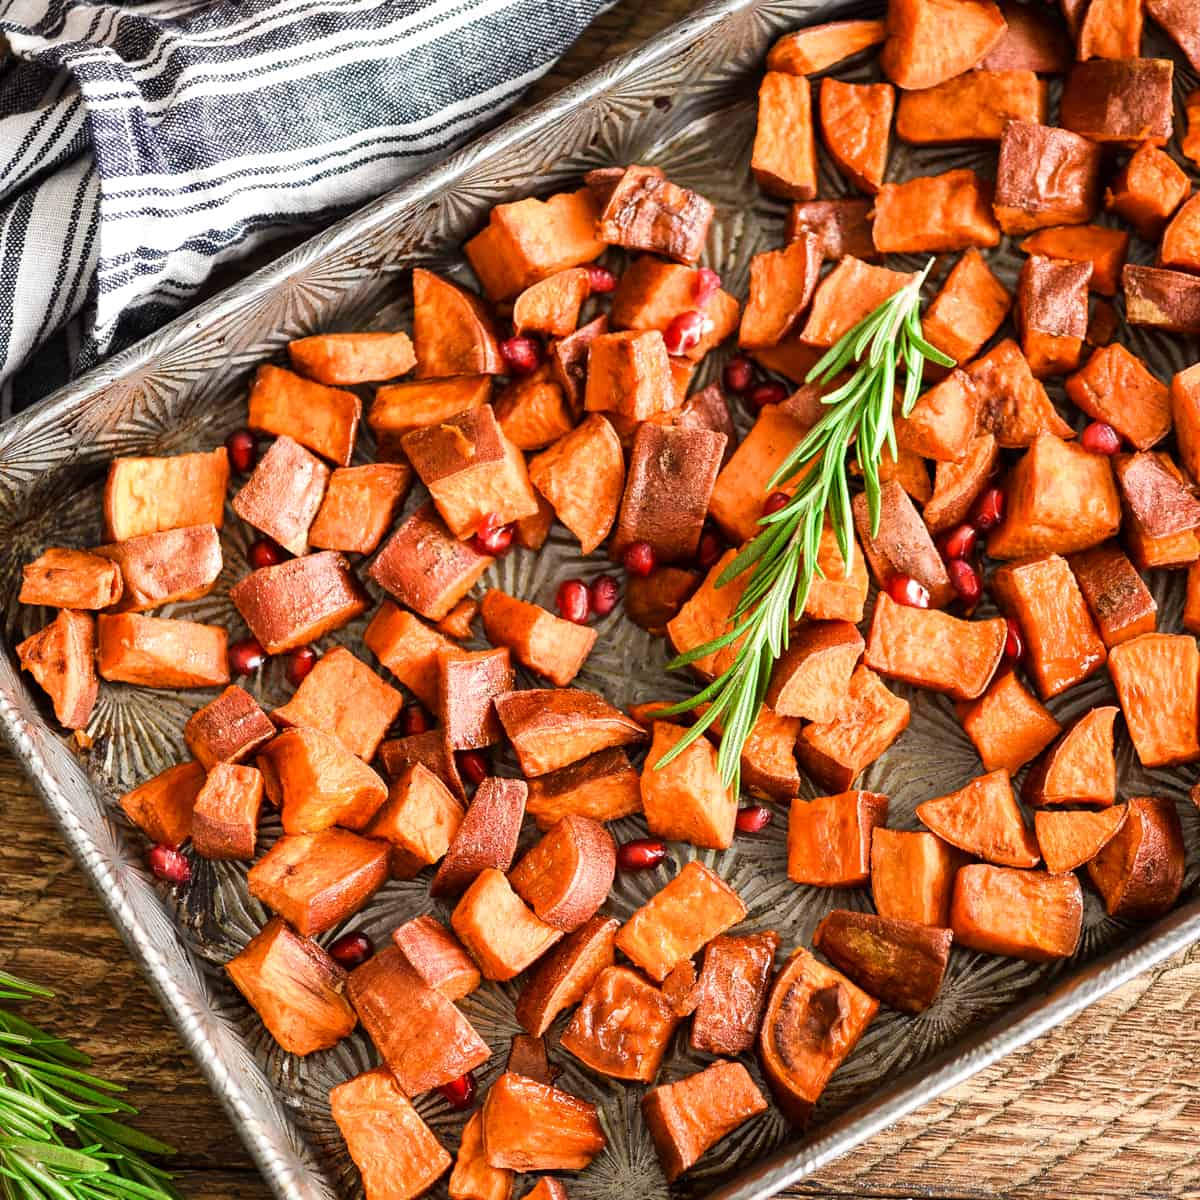 Overhead view of Cinnamon Roasted Sweet Potatoes garnished with rosemary and pomegranate seeds